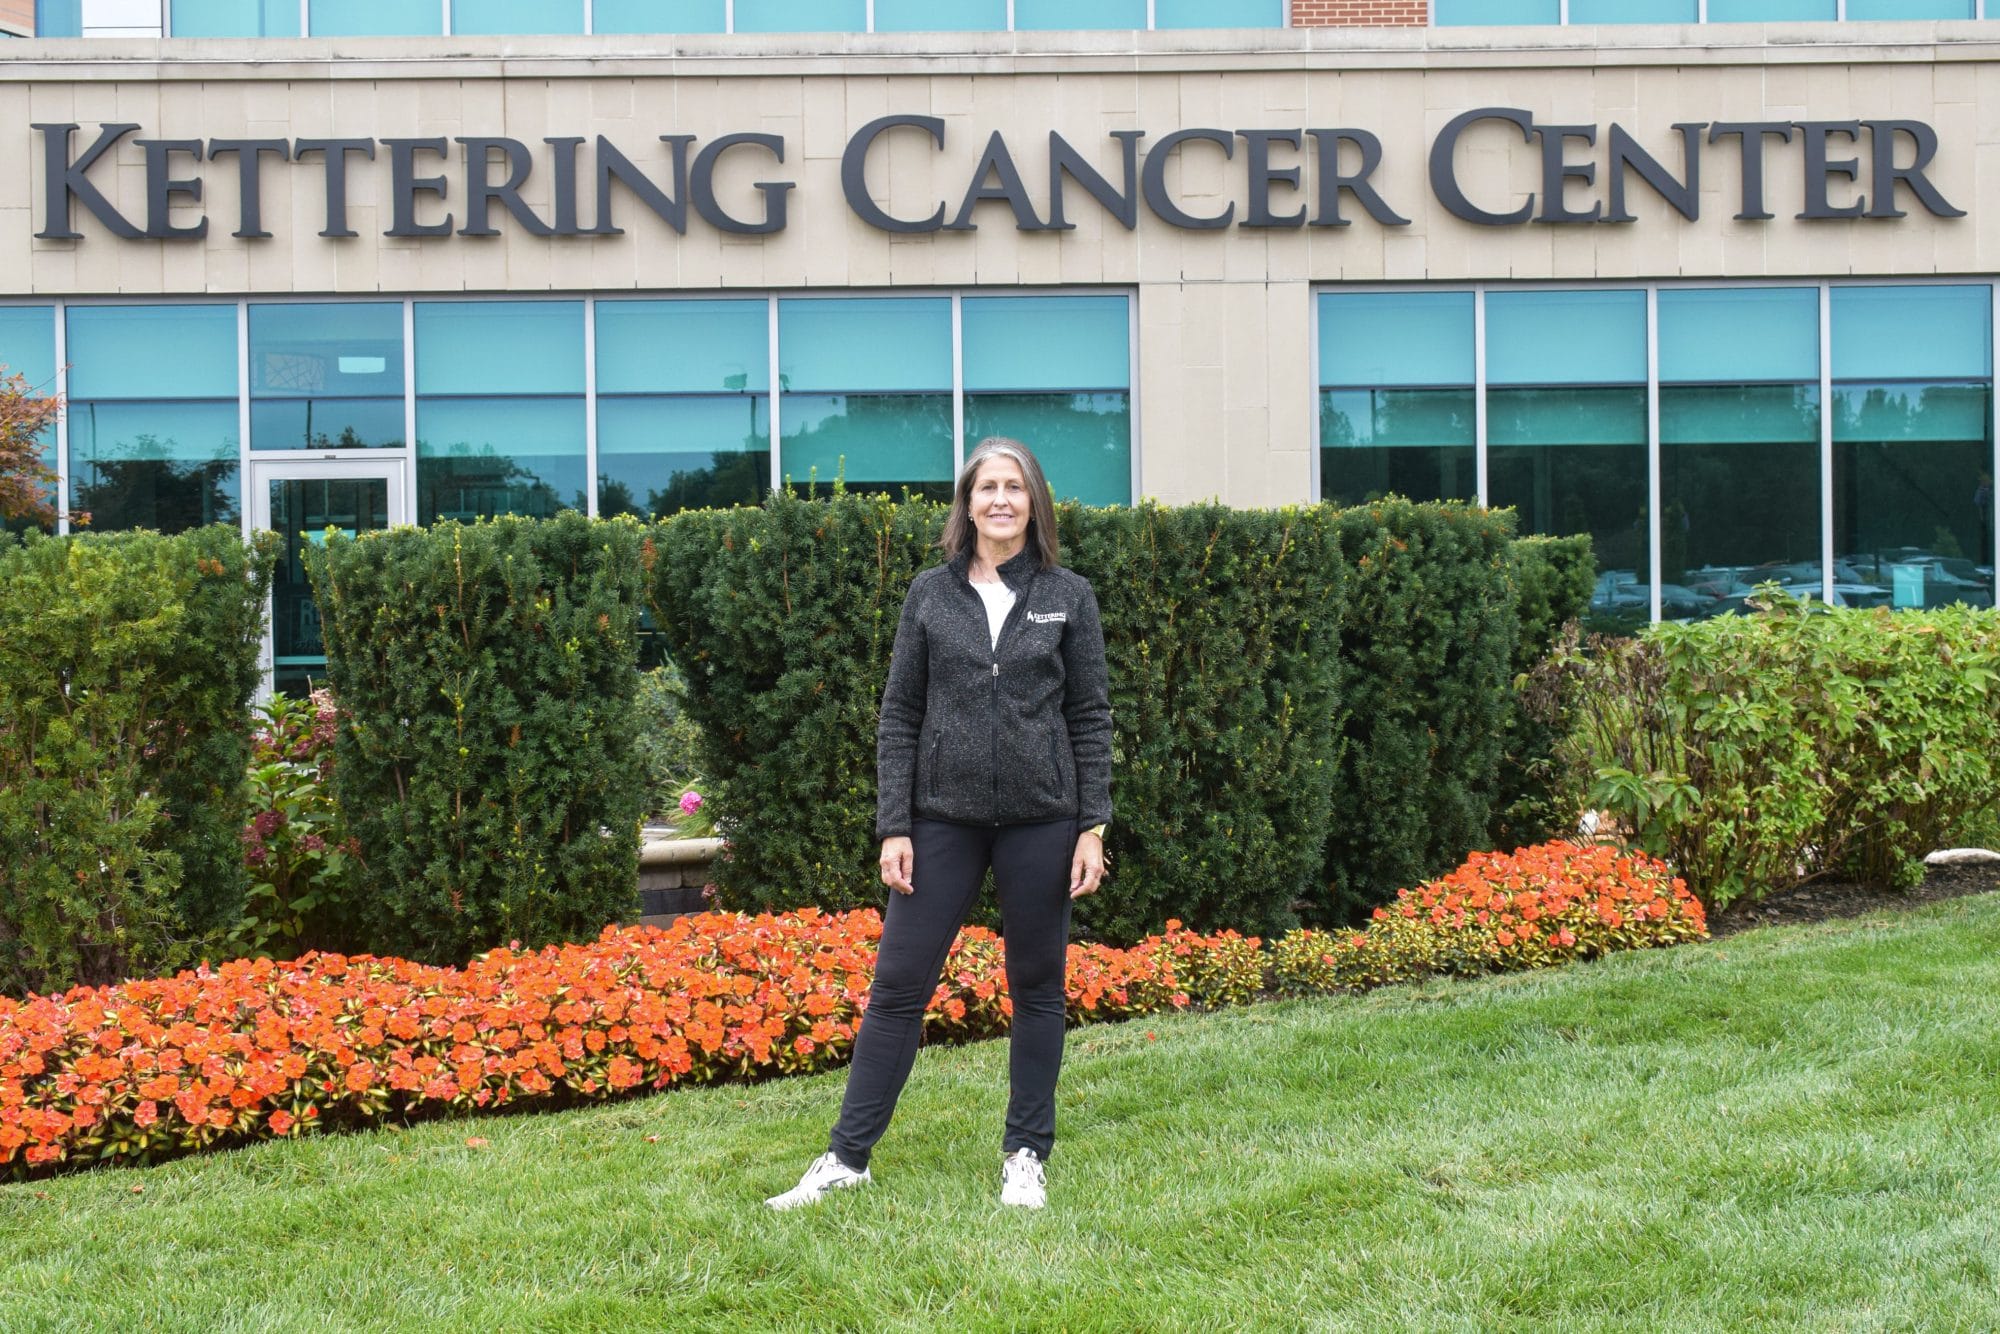 Beth stands in front of Kettering Cancer Center sign